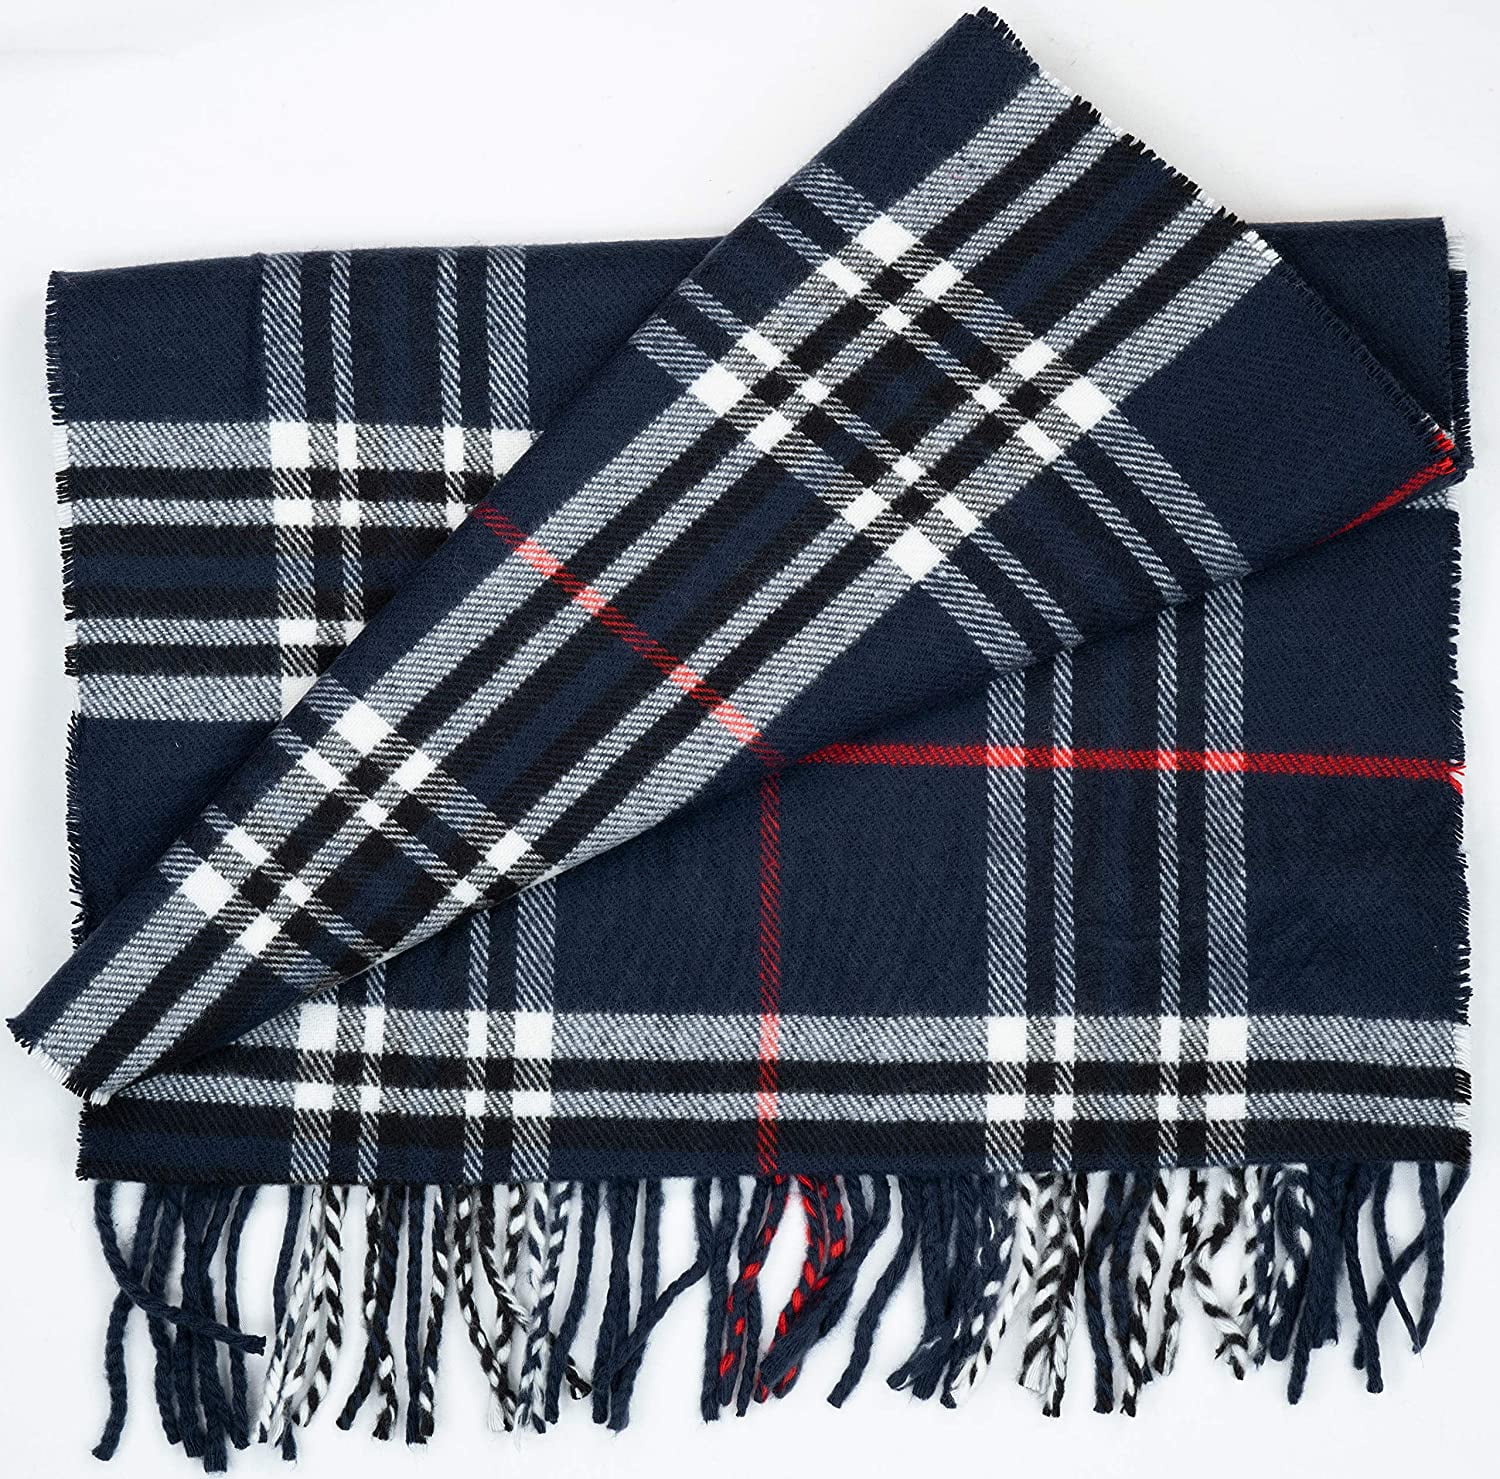 Free Shipping 2PLY Soft Warm 100% Cashmere Scarf Made in Scotland Men Women 